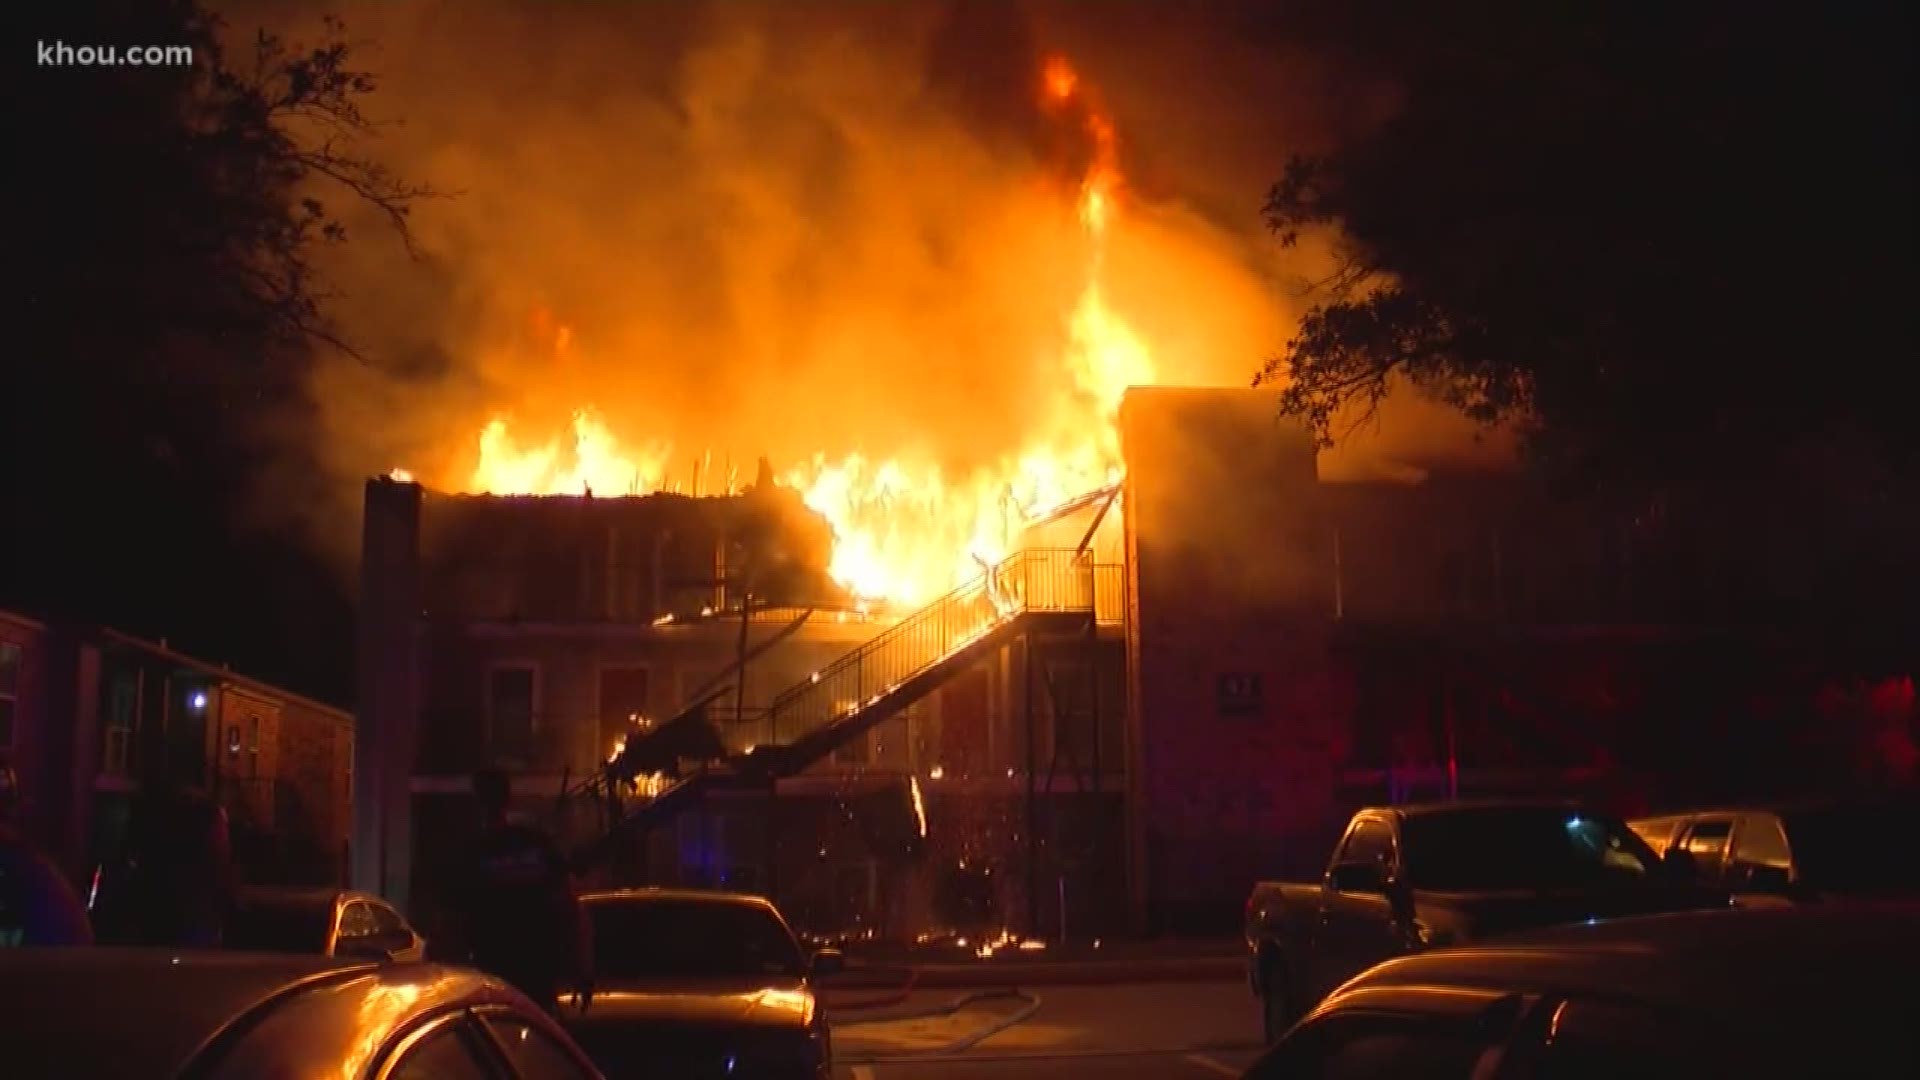 Twenty-four units were damaged in a two-alarm apartment fire in northeast Harris County early Friday morning.